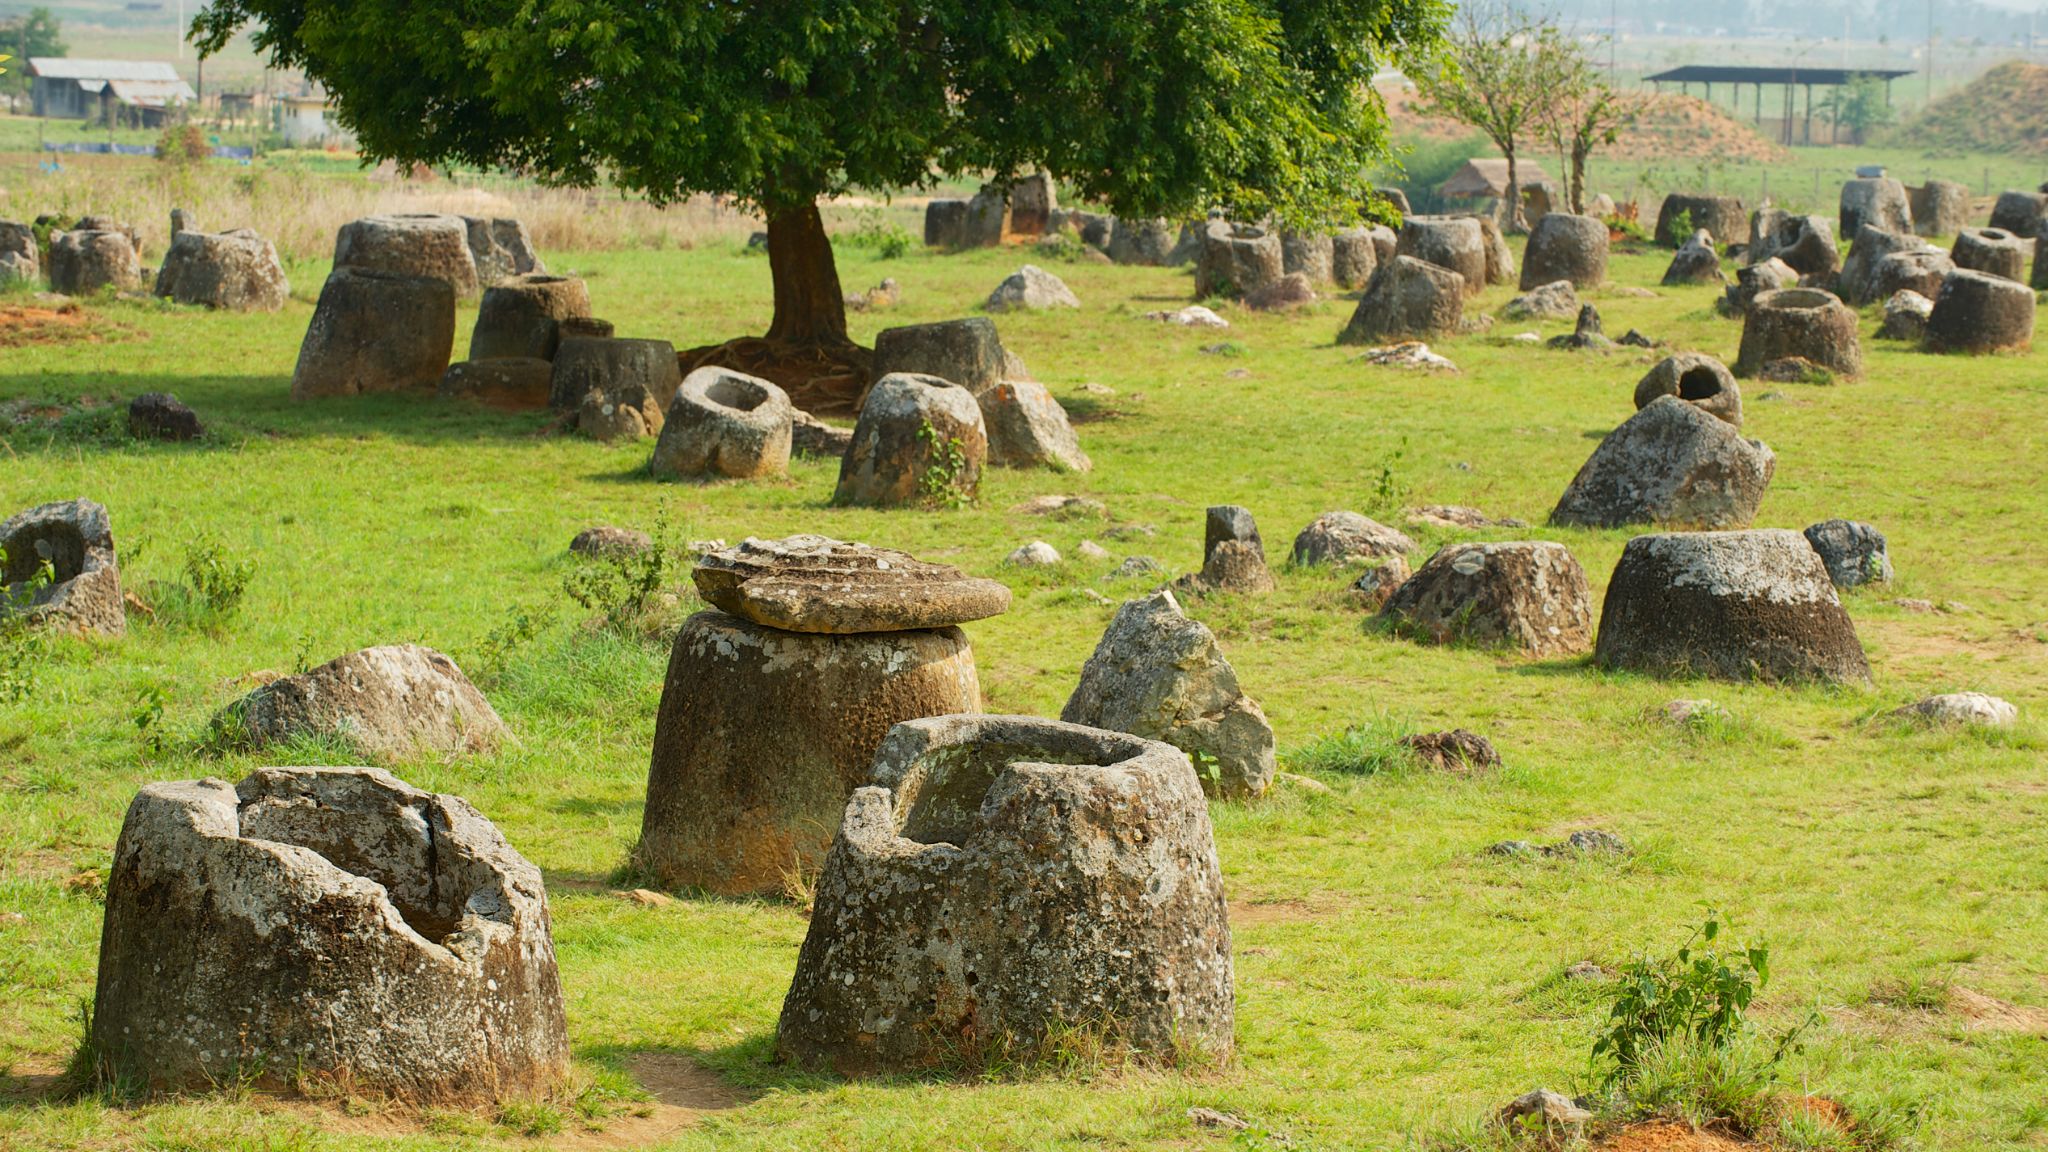 Day 6 Discover Hundreds Of Ancient Stone Jars In Plain Of Jars